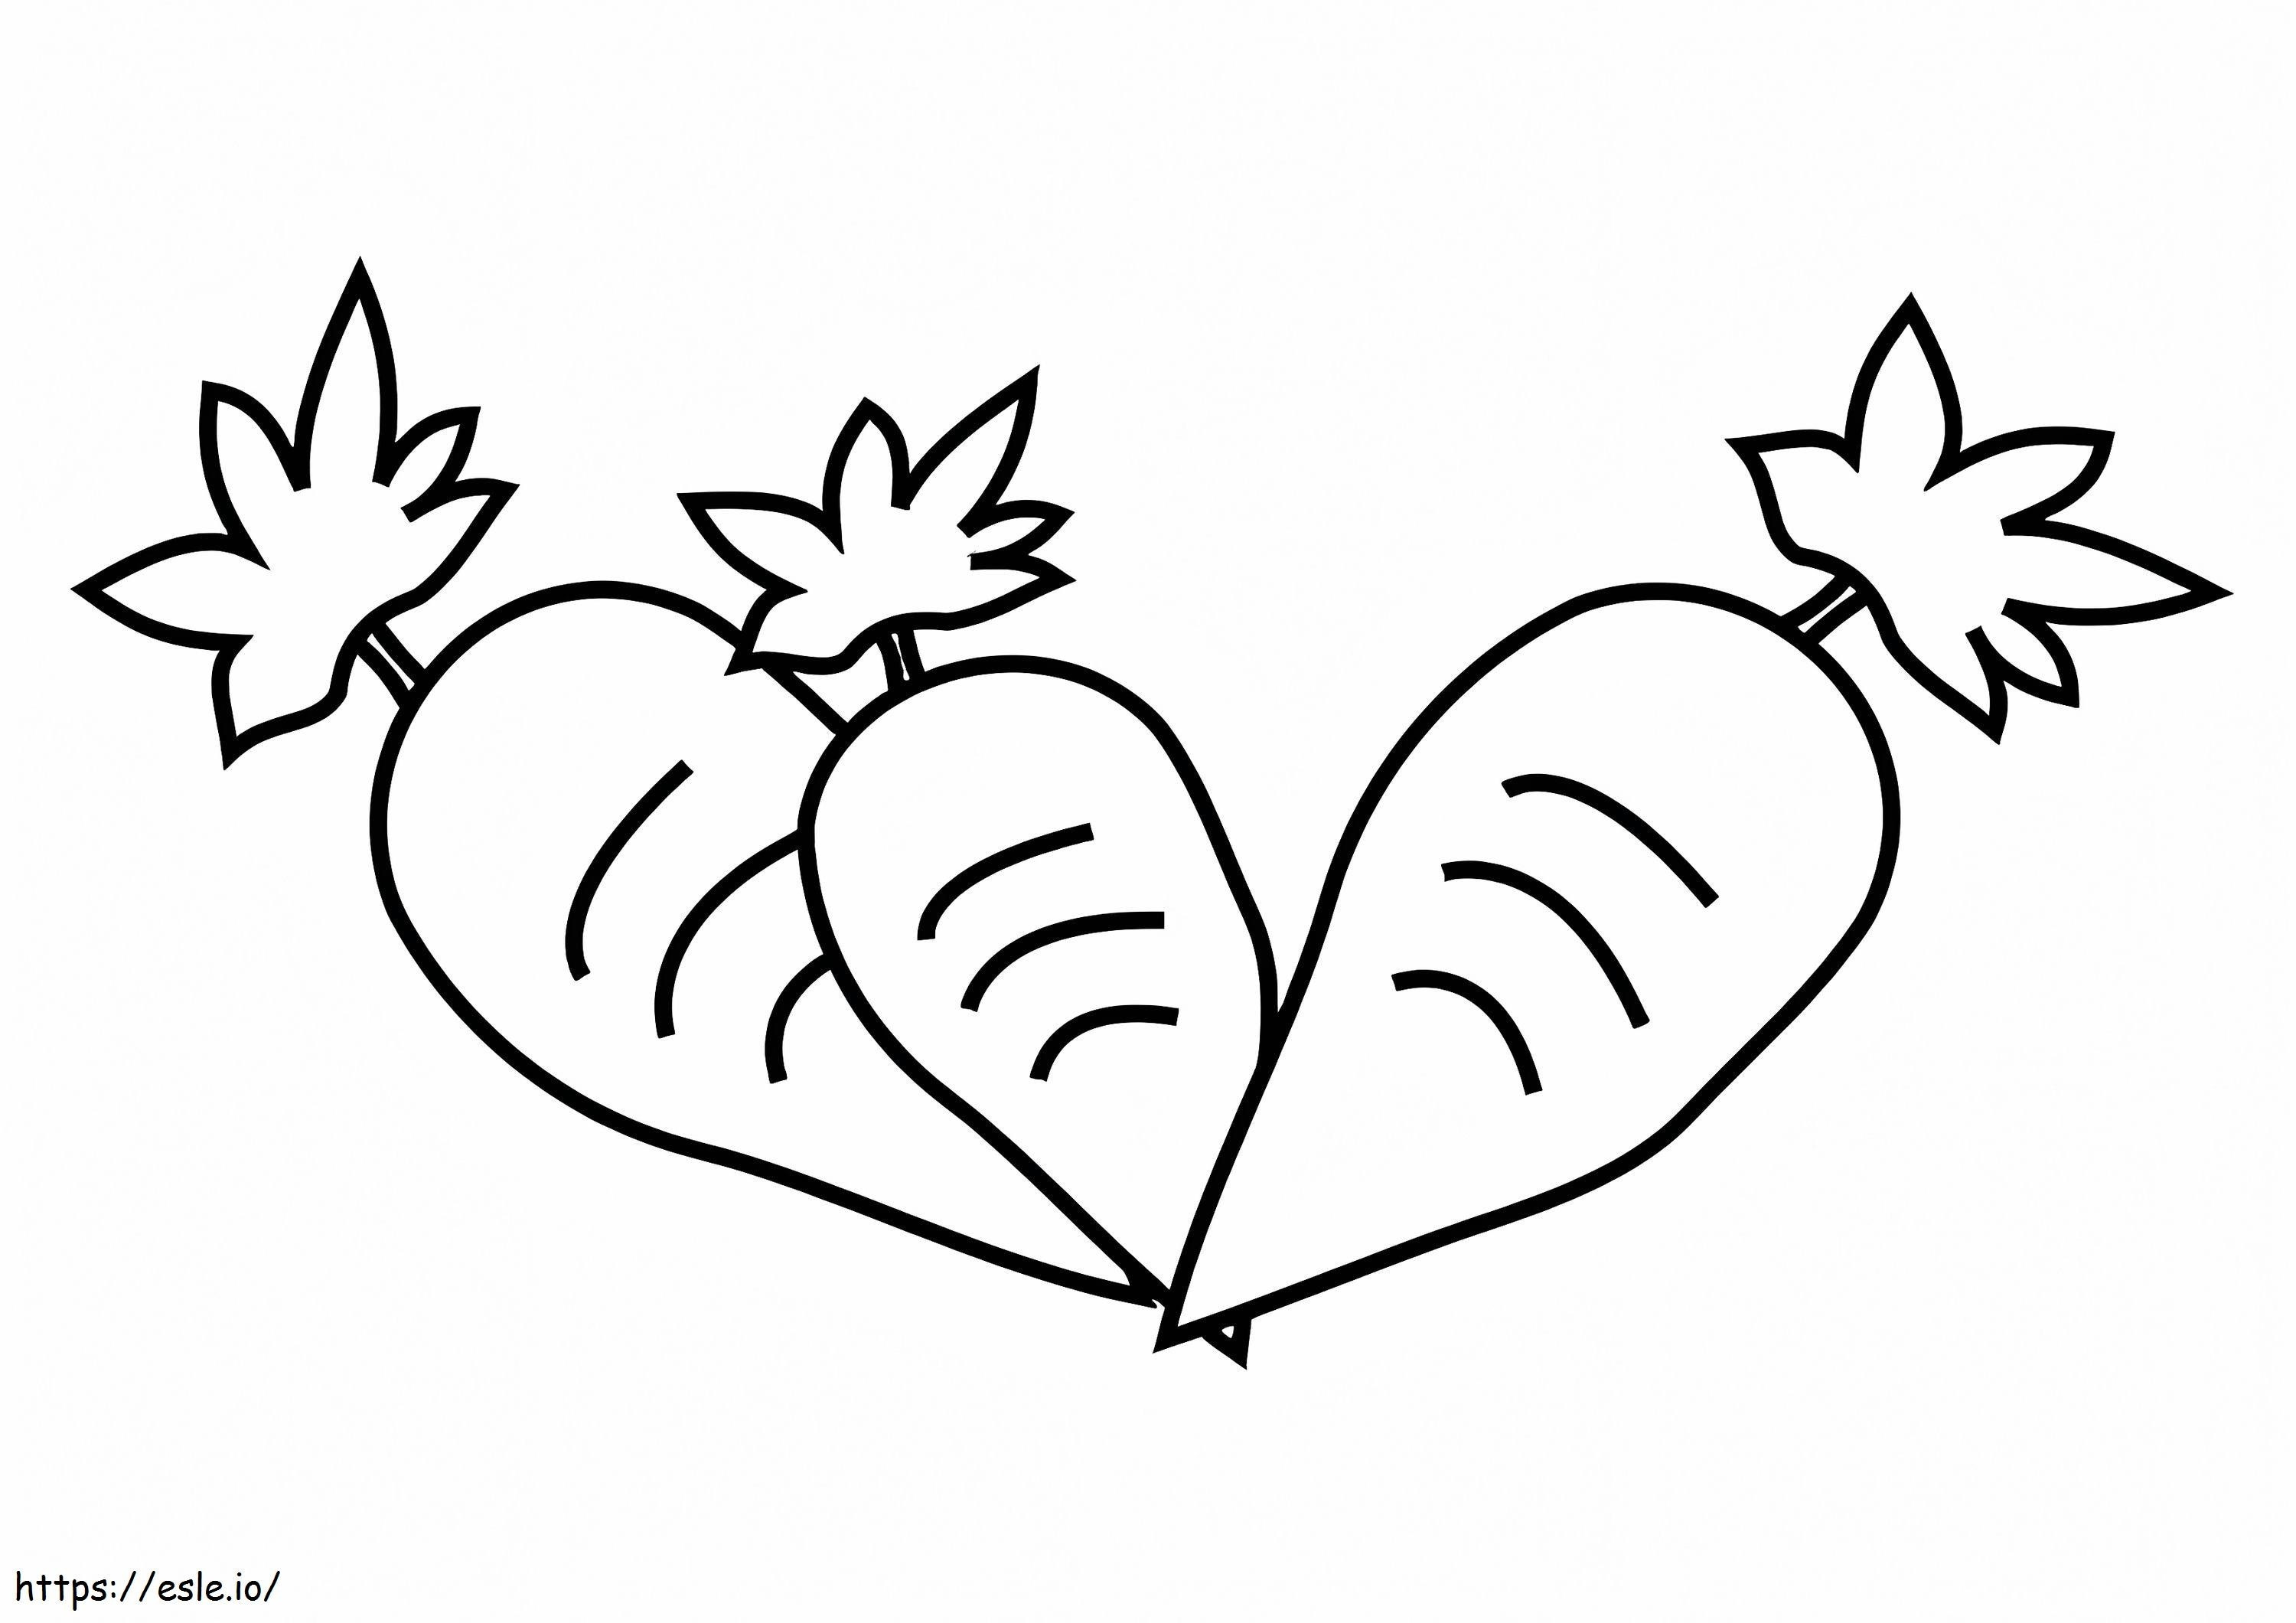 Three Cute Carrots coloring page